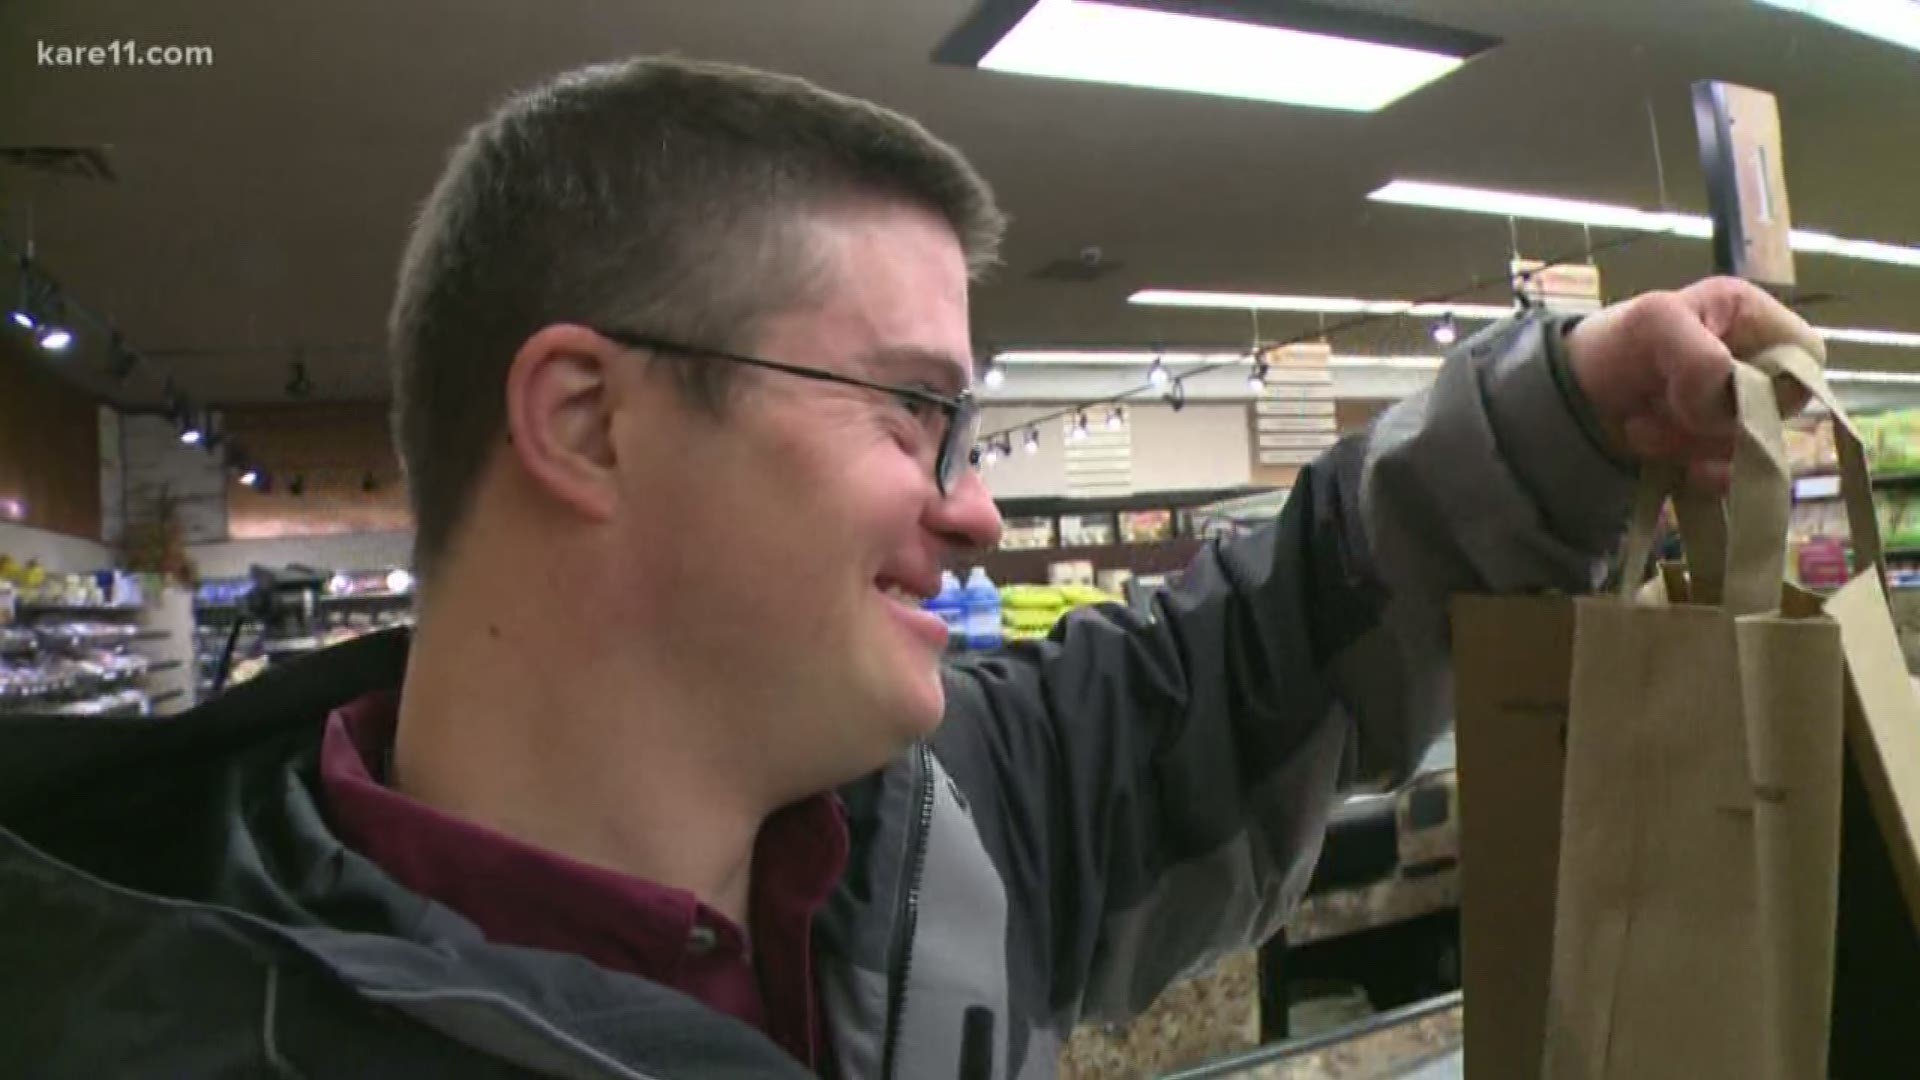 People living with disabilities are twice as likely to be unemployed compared to those who aren't. KARE 11's Heidi Wigdahl caught up with a local nonprofit and a business working to close that gap.